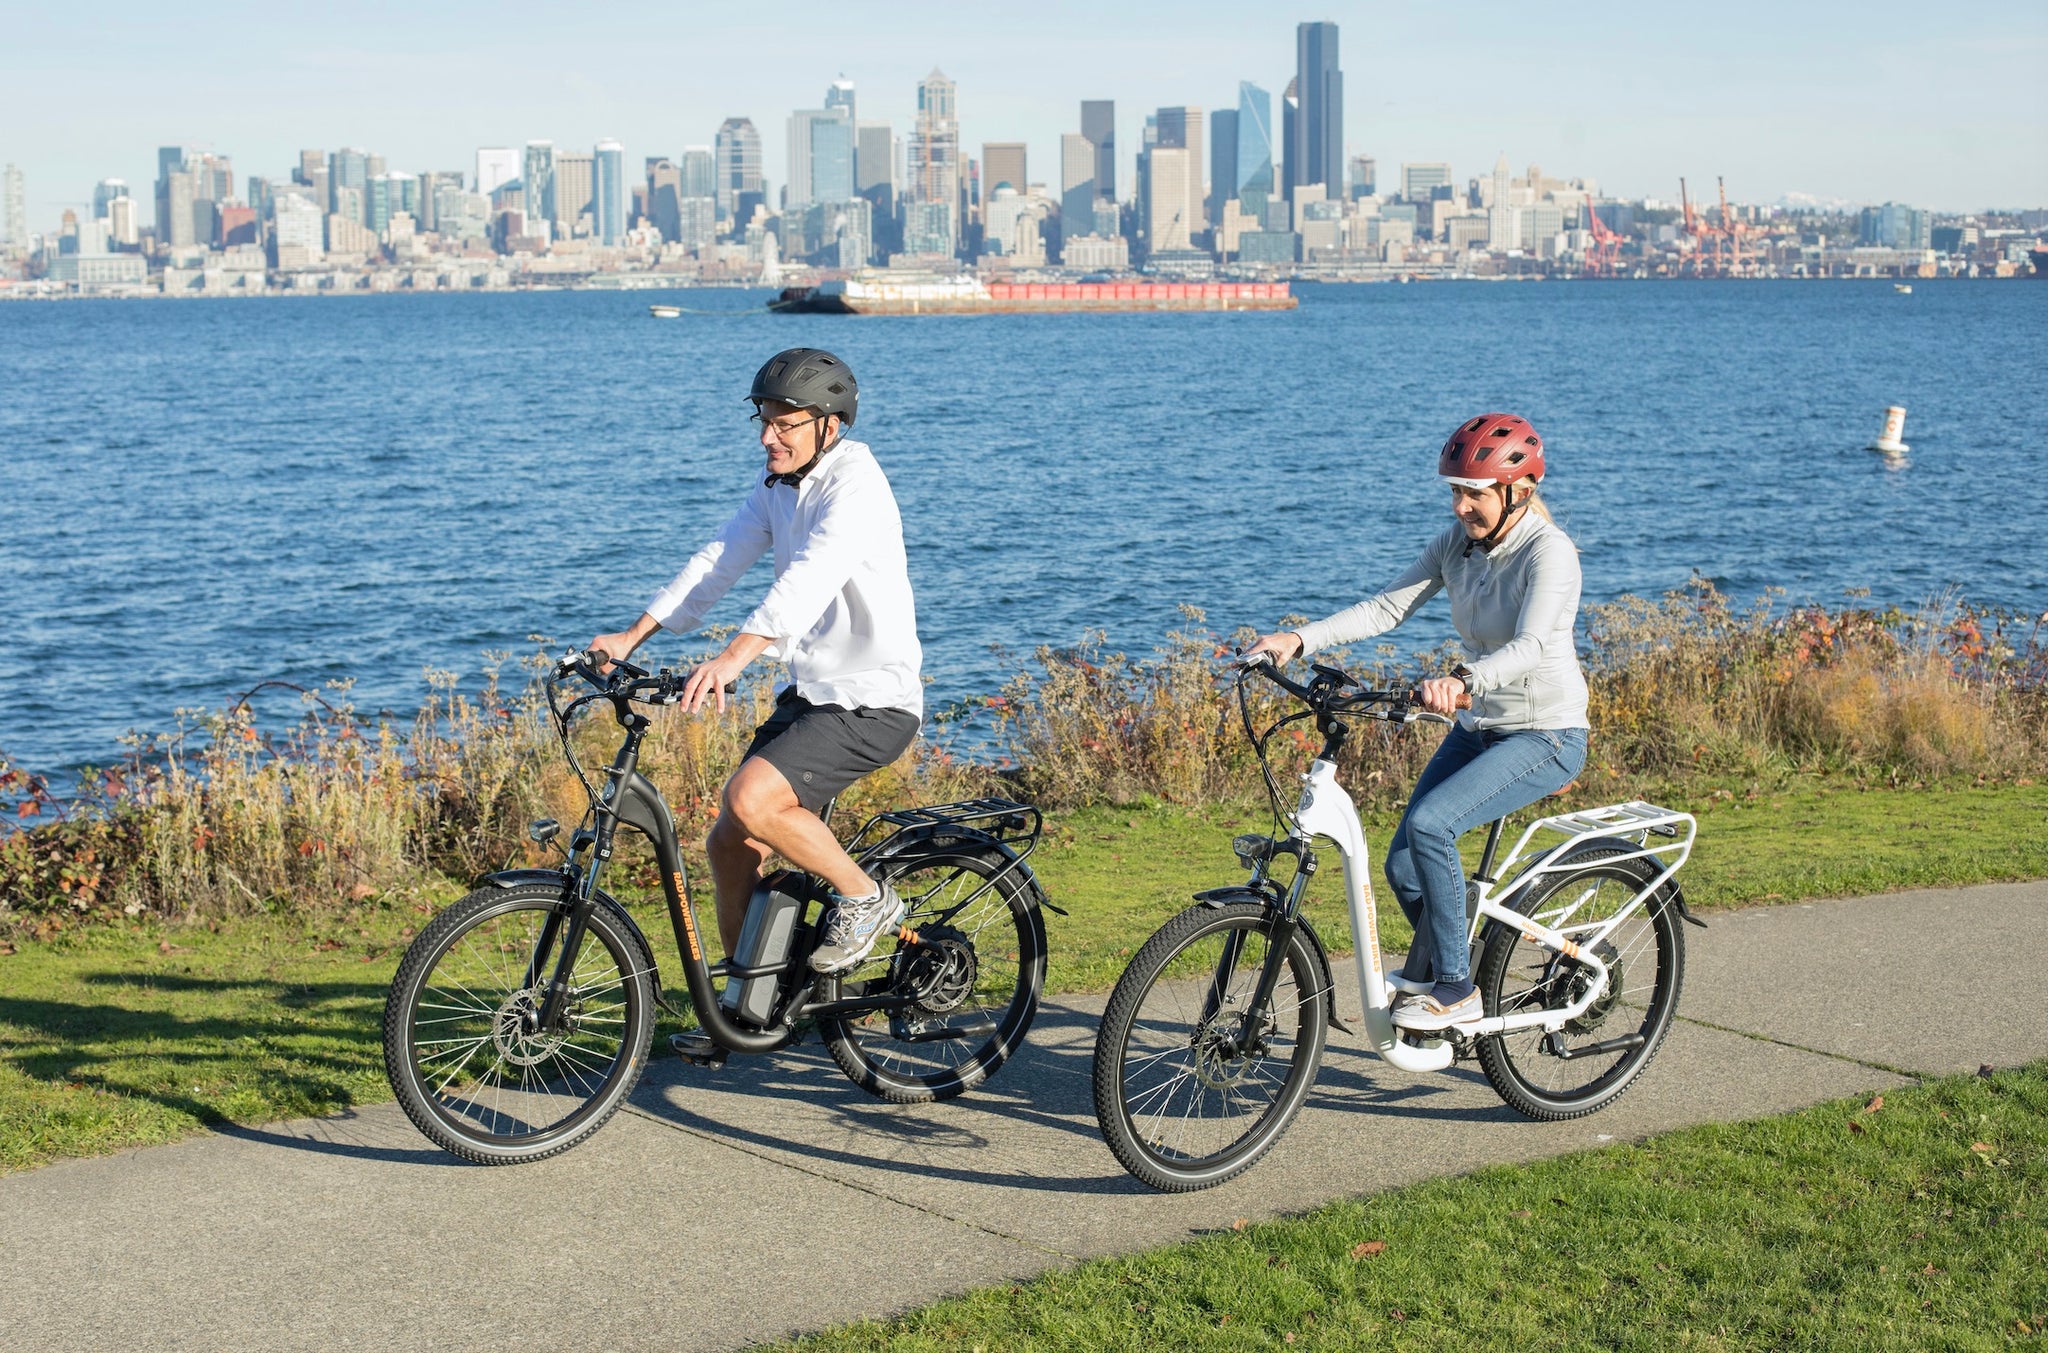 A couple rides a pair of Rad City electric bikes along the waterway. A city skyline is in the background.